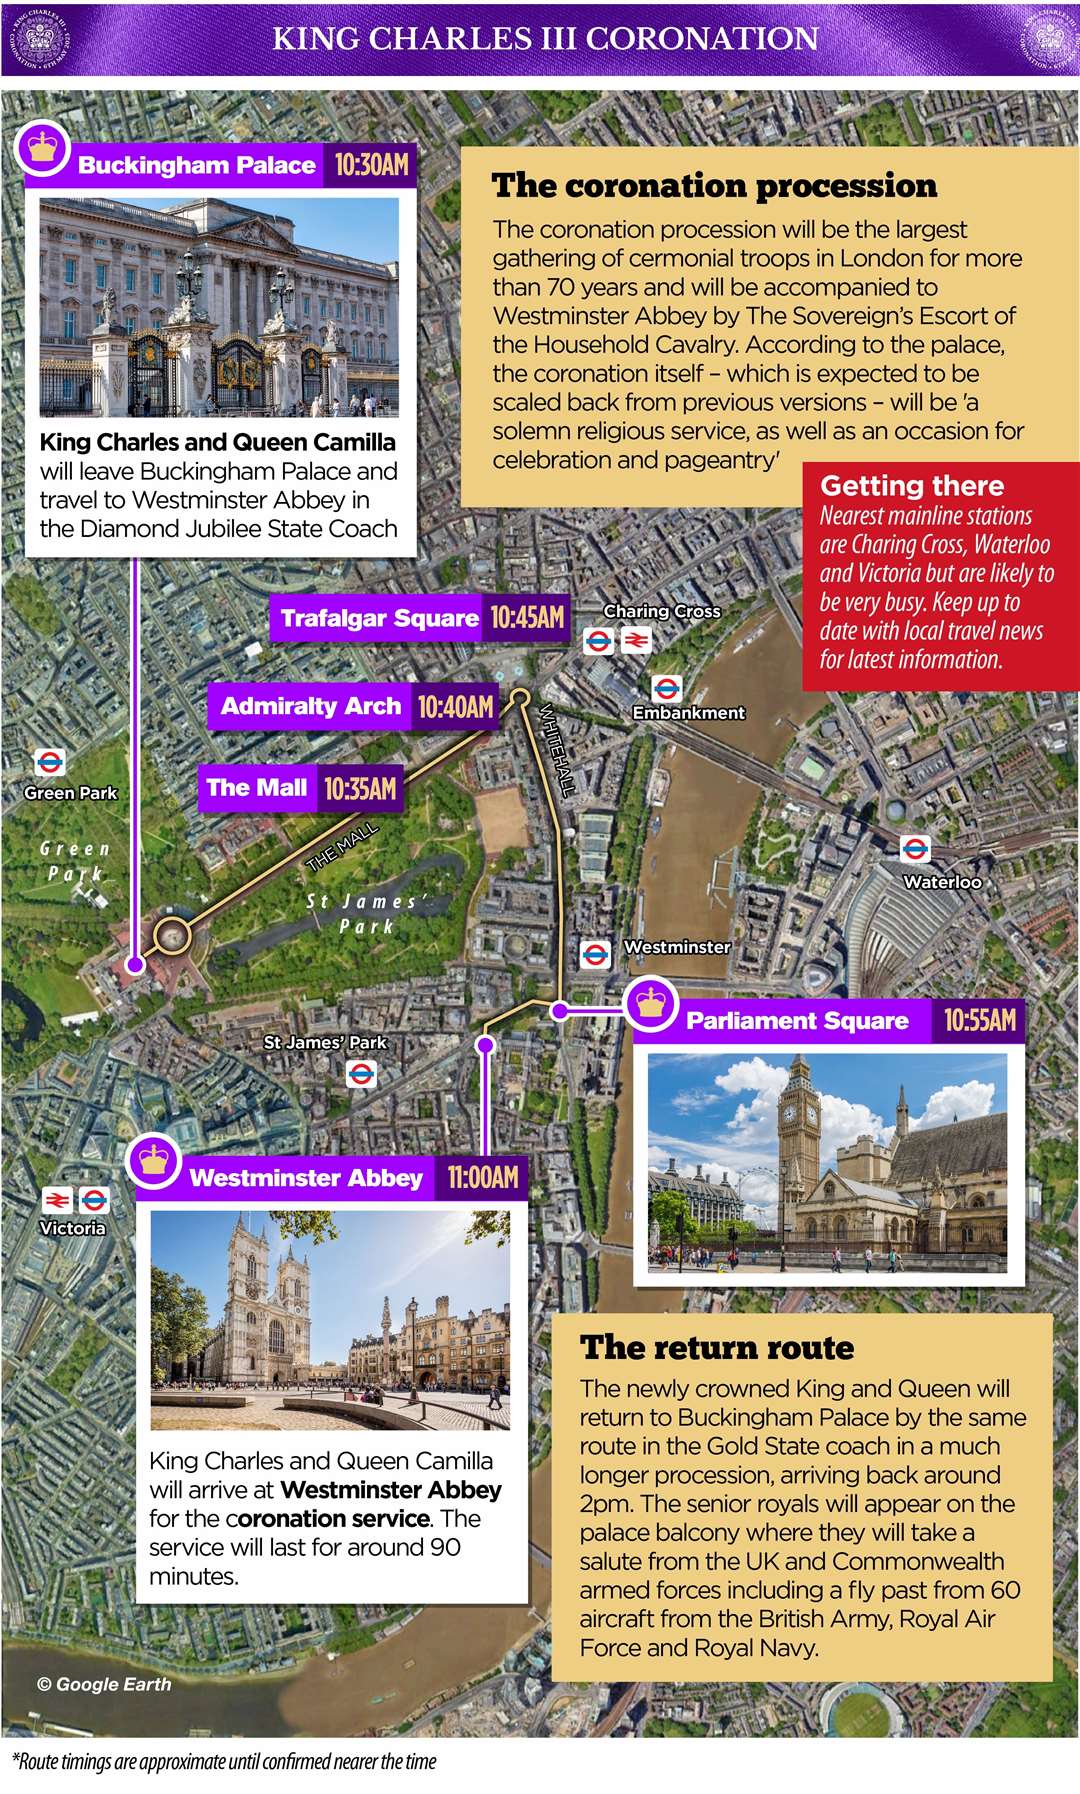 The King and Queen will take the same route to and from Westminster Abbey